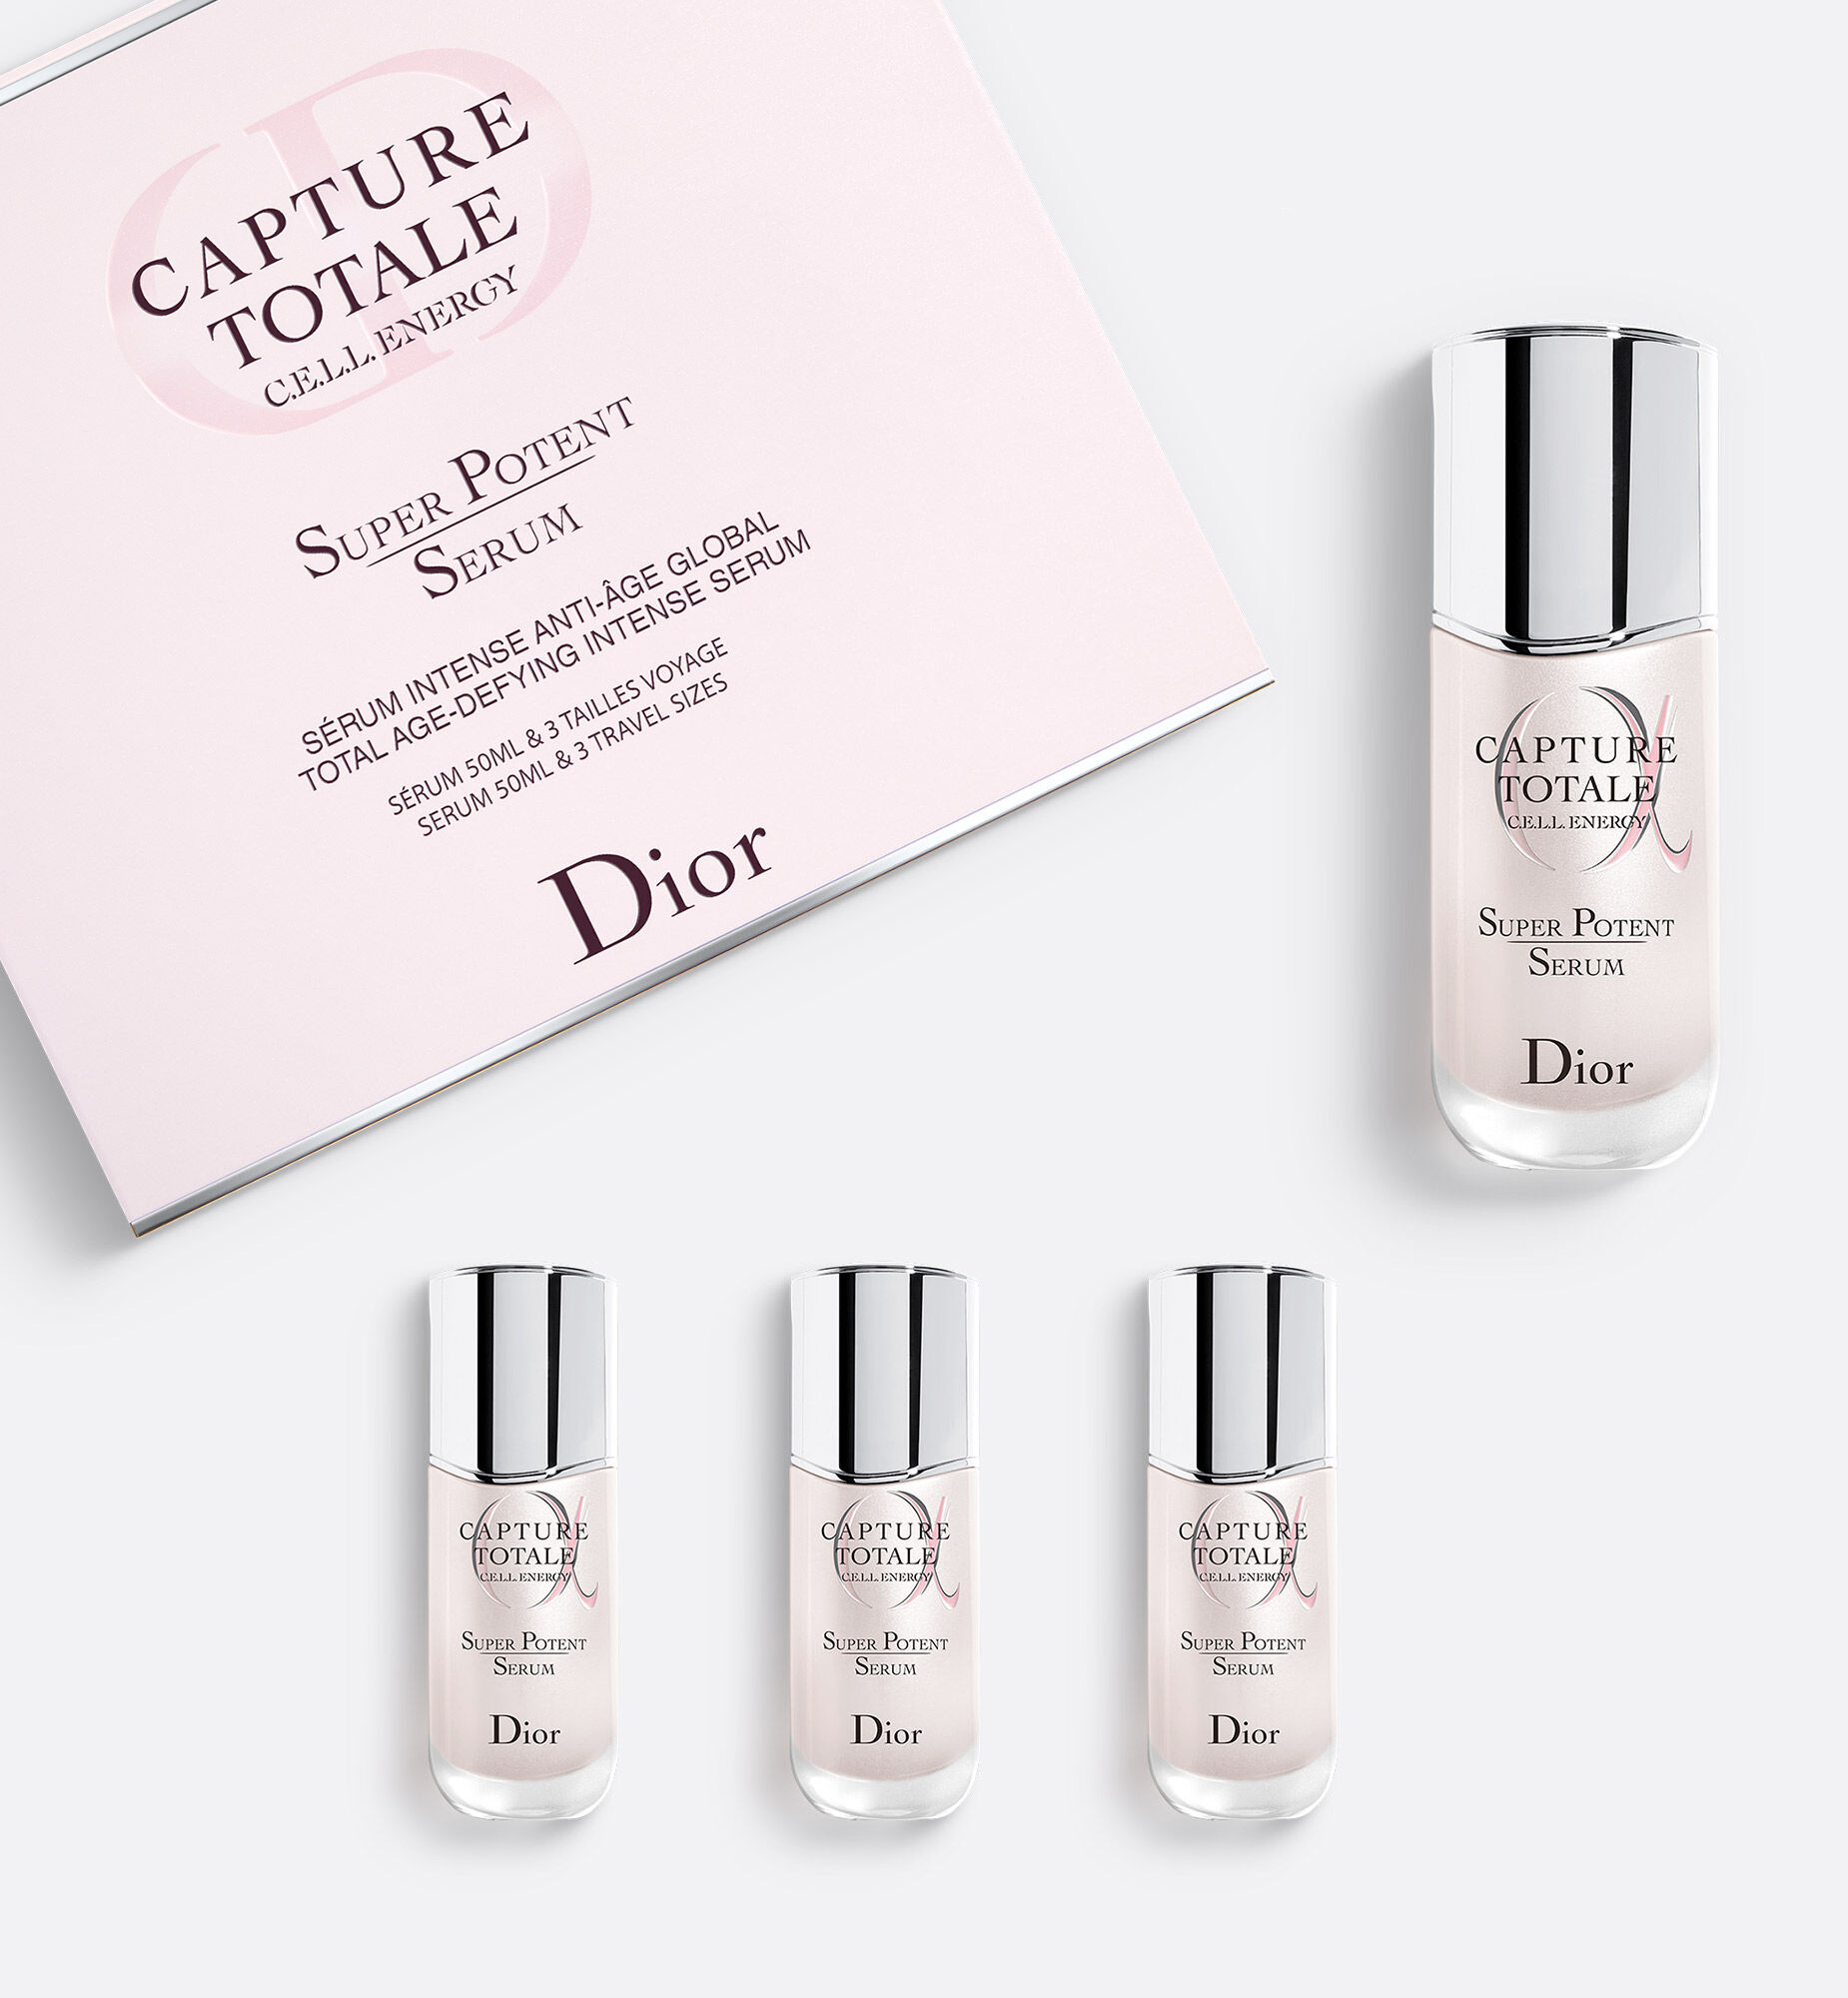 Dior CAPTURE TOTALE CELL ENERGY Super potent serum 3ml